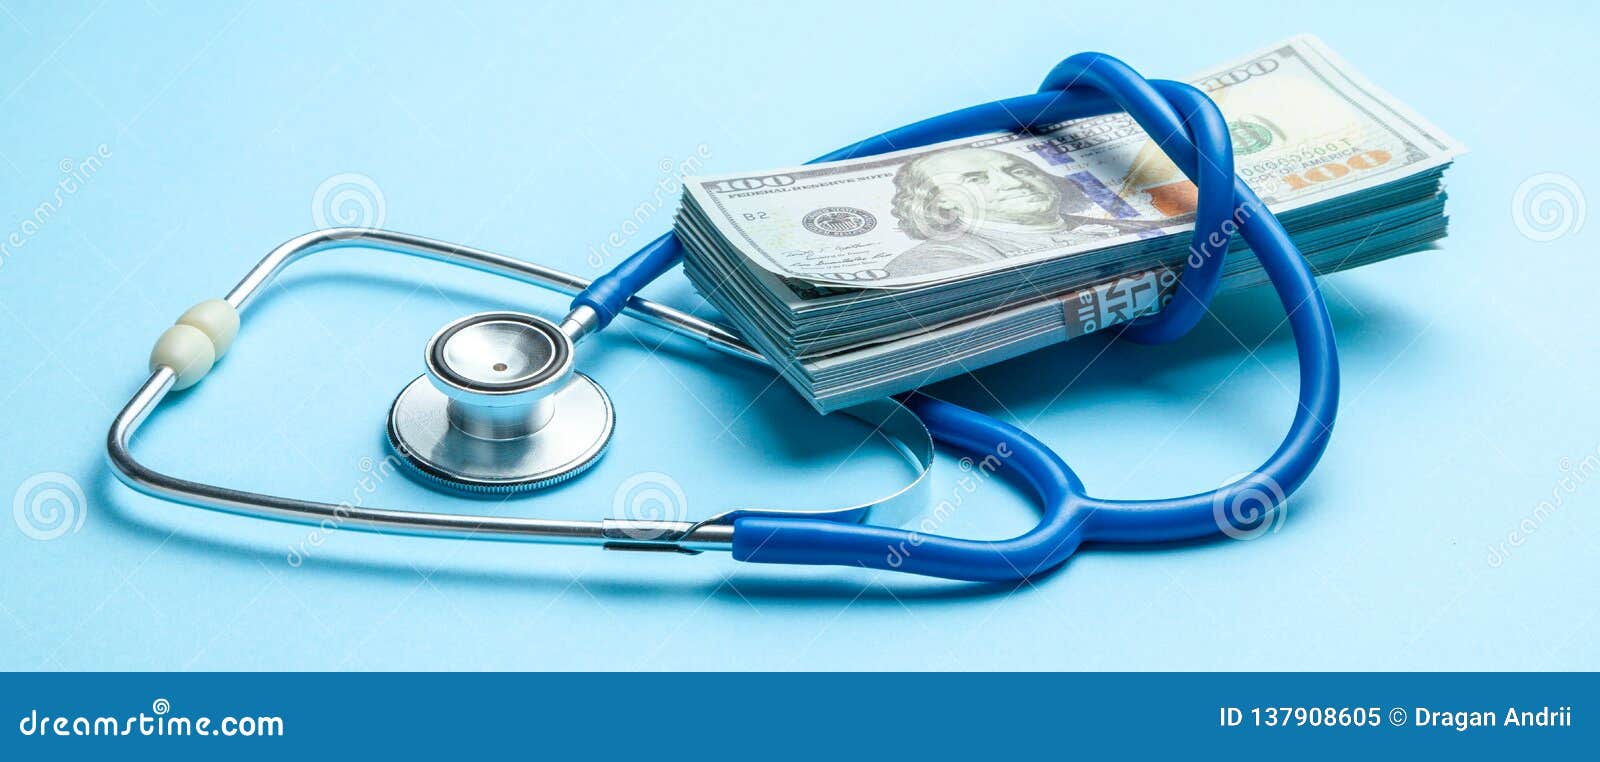 stack of cash dollars and stethoscope on blue background. the concept of medical strechevka or expensive medicine, doctors salary